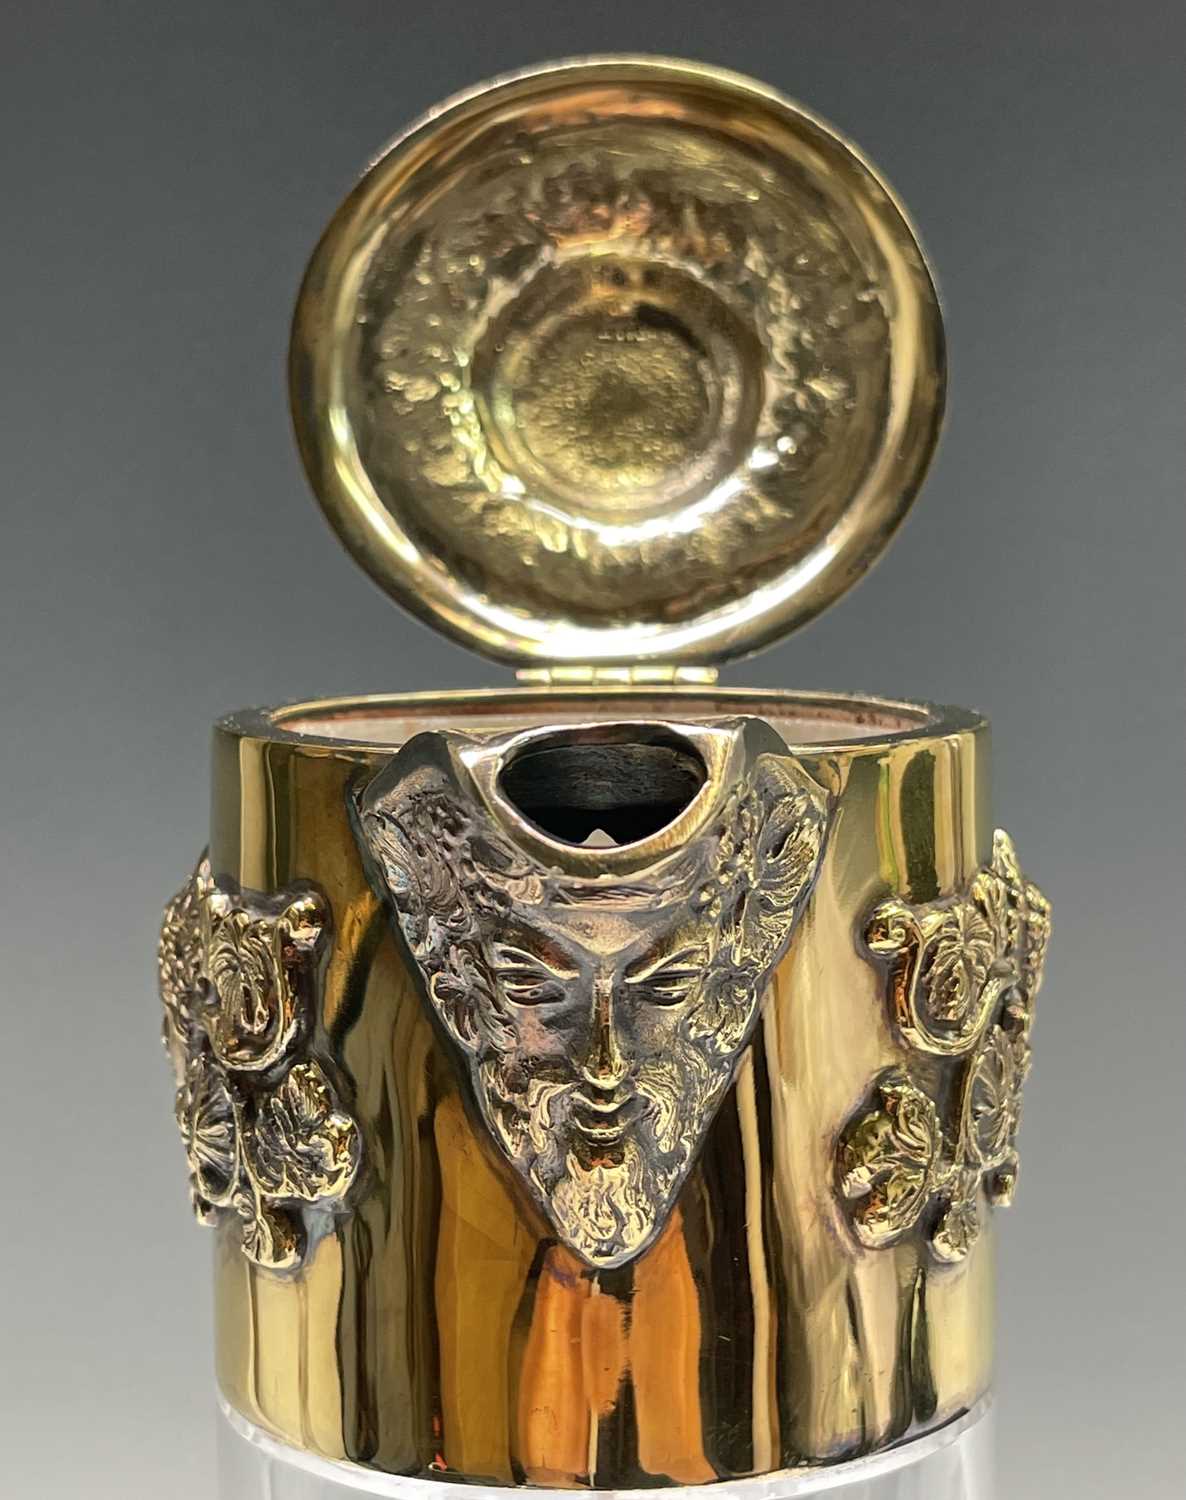 An Asprey claret jug the glass body cut and engraved with vines the silver-gilt mount with - Image 10 of 16